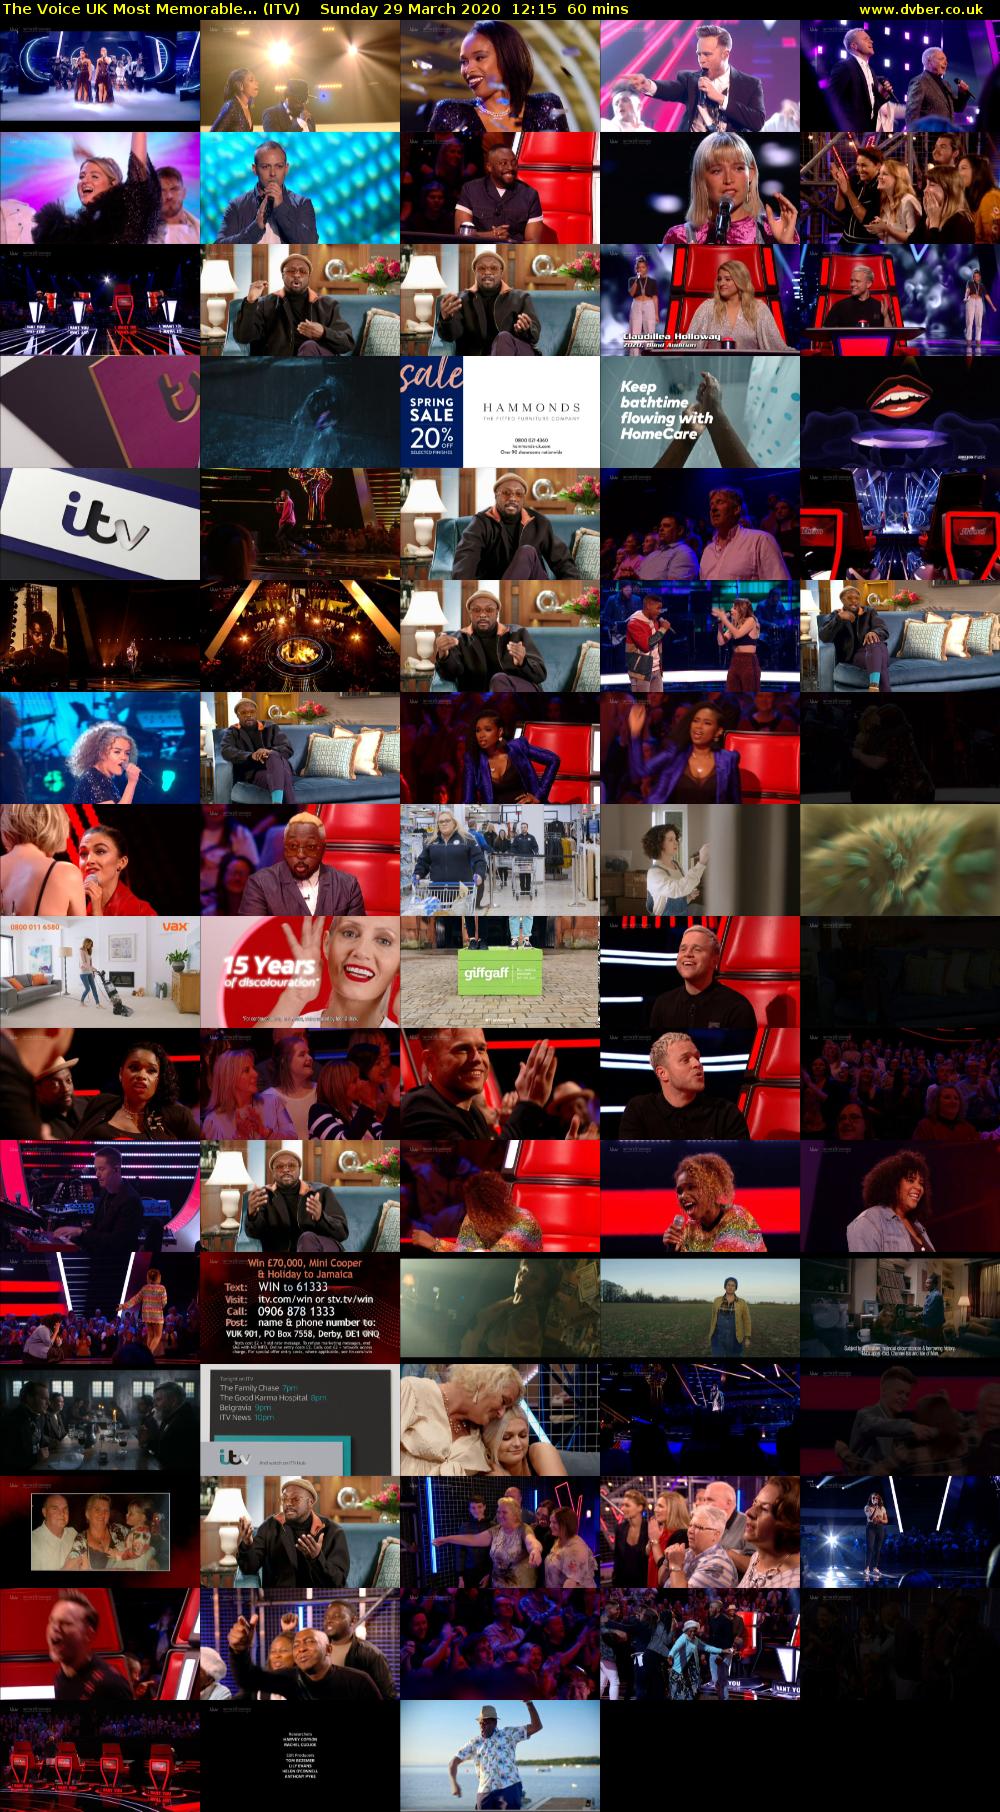 The Voice UK Most Memorable... (ITV) Sunday 29 March 2020 12:15 - 13:15